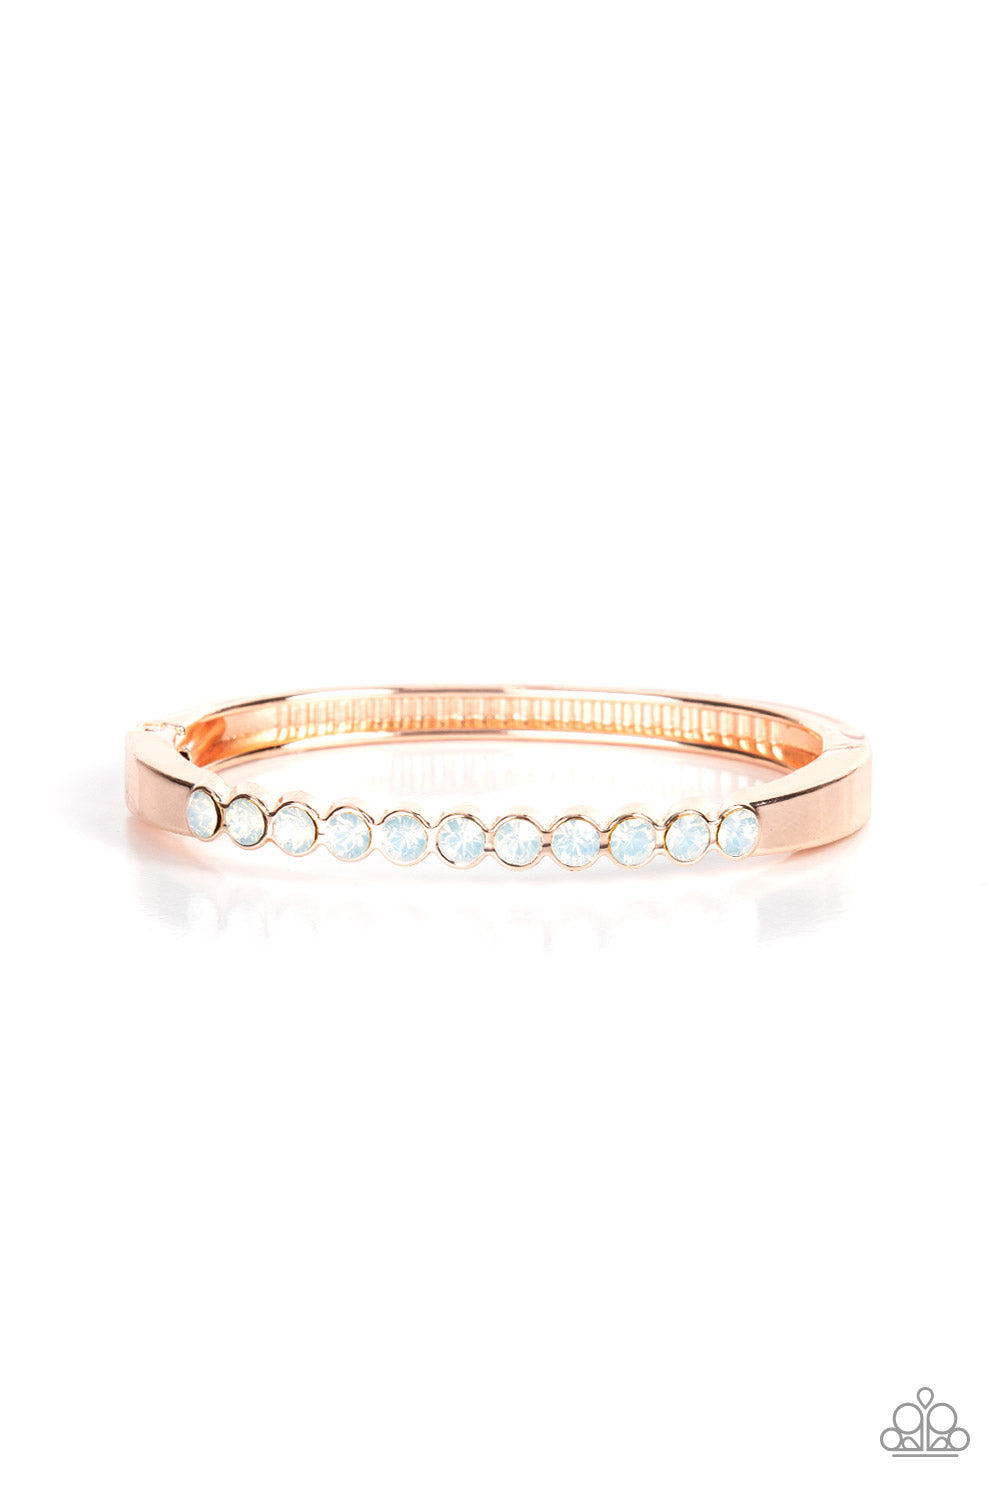 Mystical Masterpiece - Rose Gold Hinge Bracelet - Paparazzi Accessories - An opalescent row of white rhinestones hinges to a glistening rose gold bar that curves around the wrist, creating a sparkly cuff-like bracelet. Features a hinged closure. 